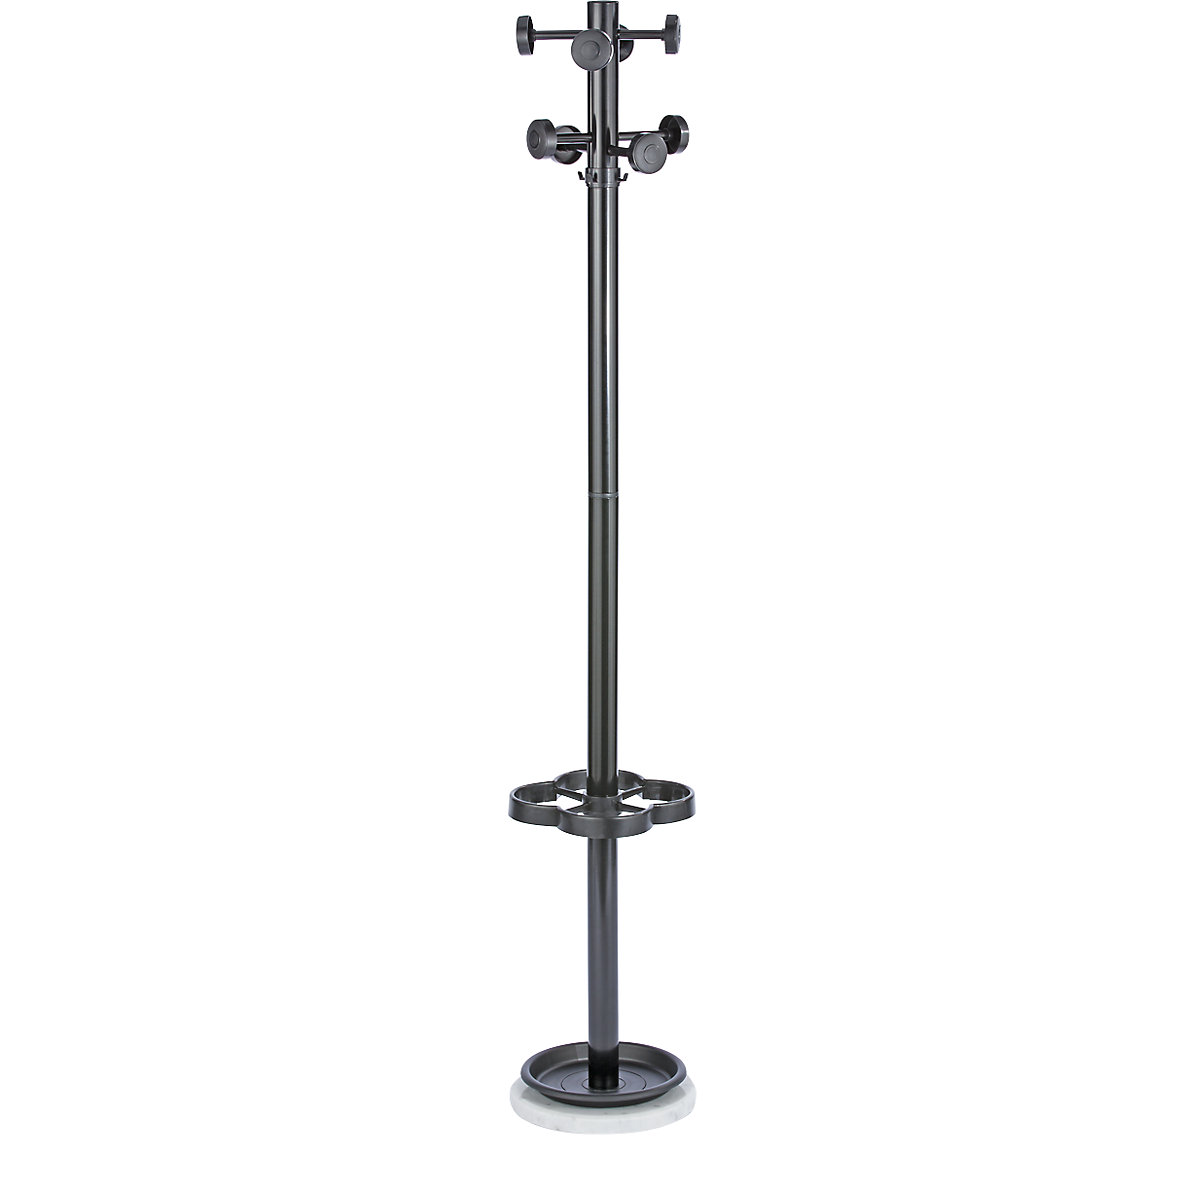 Coat stand with black hook knobs